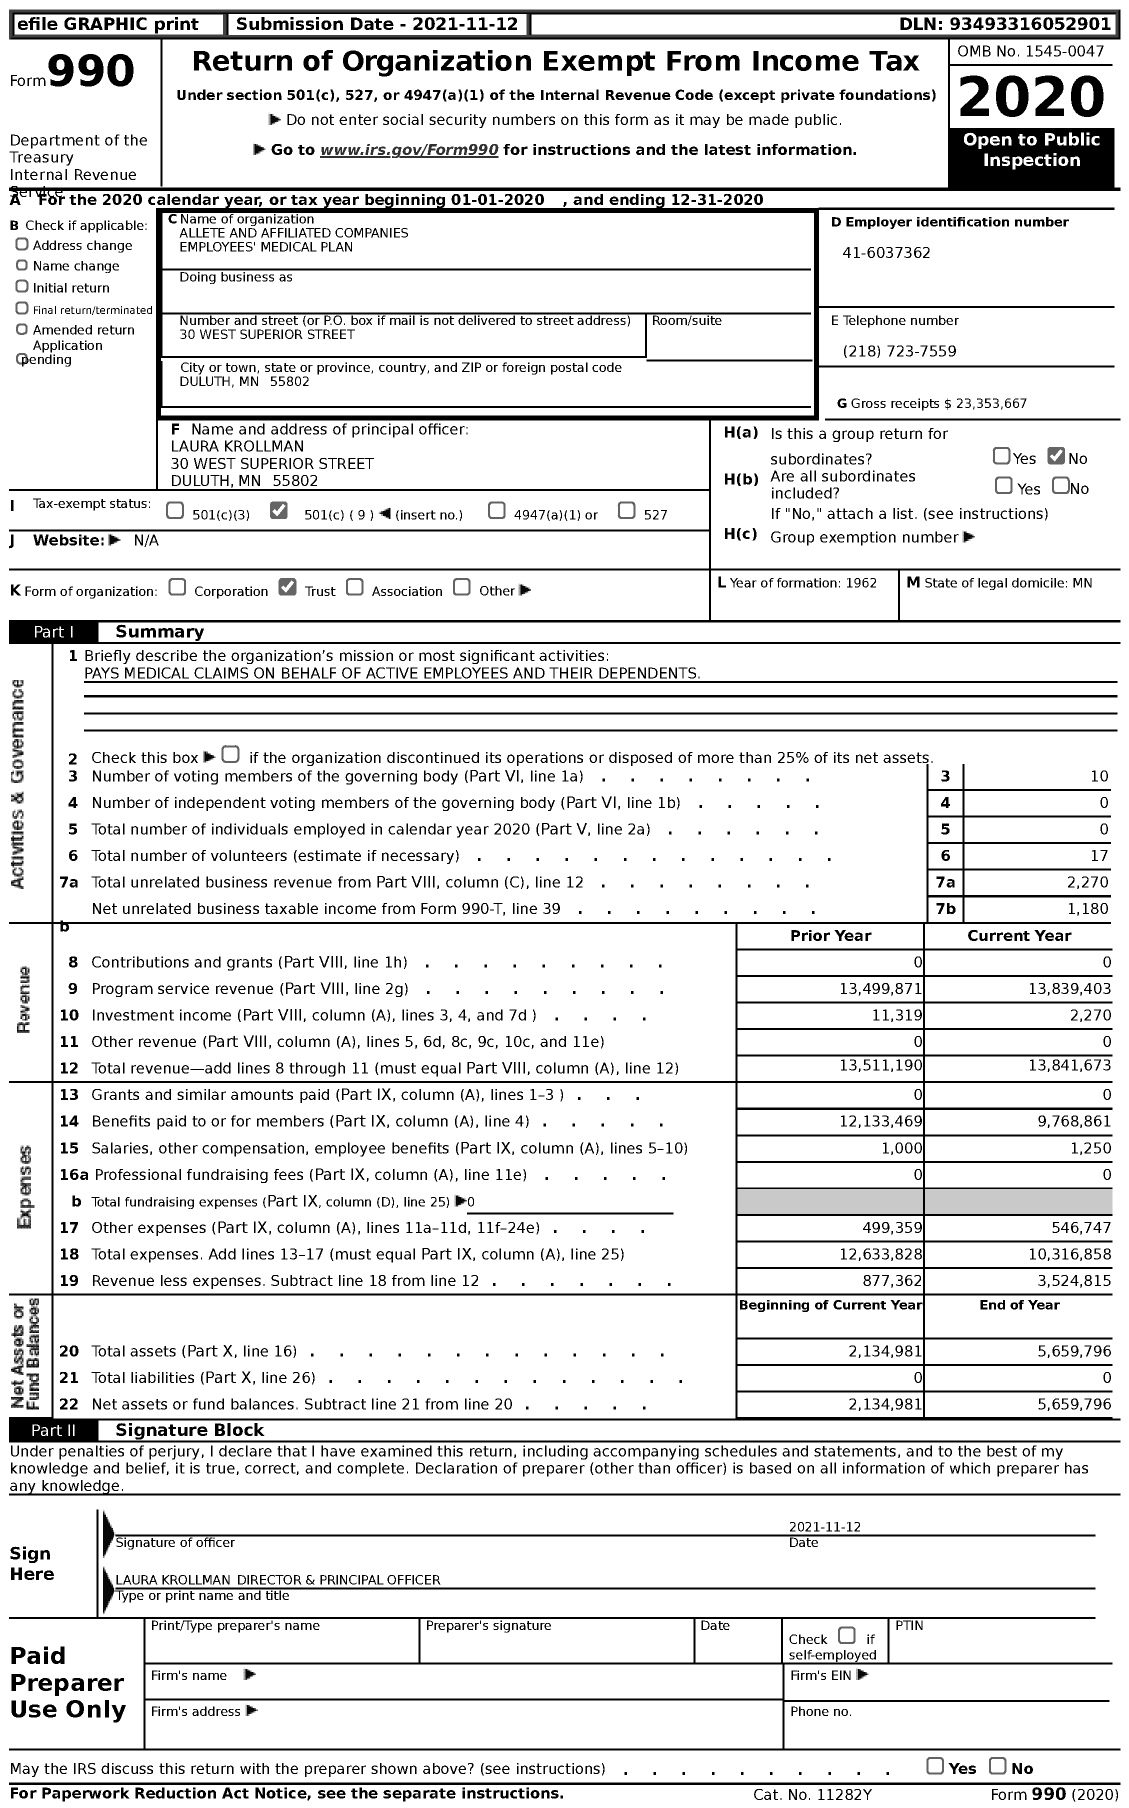 Image of first page of 2020 Form 990 for Allete and Affiliated Companies Employees' Medical Plan